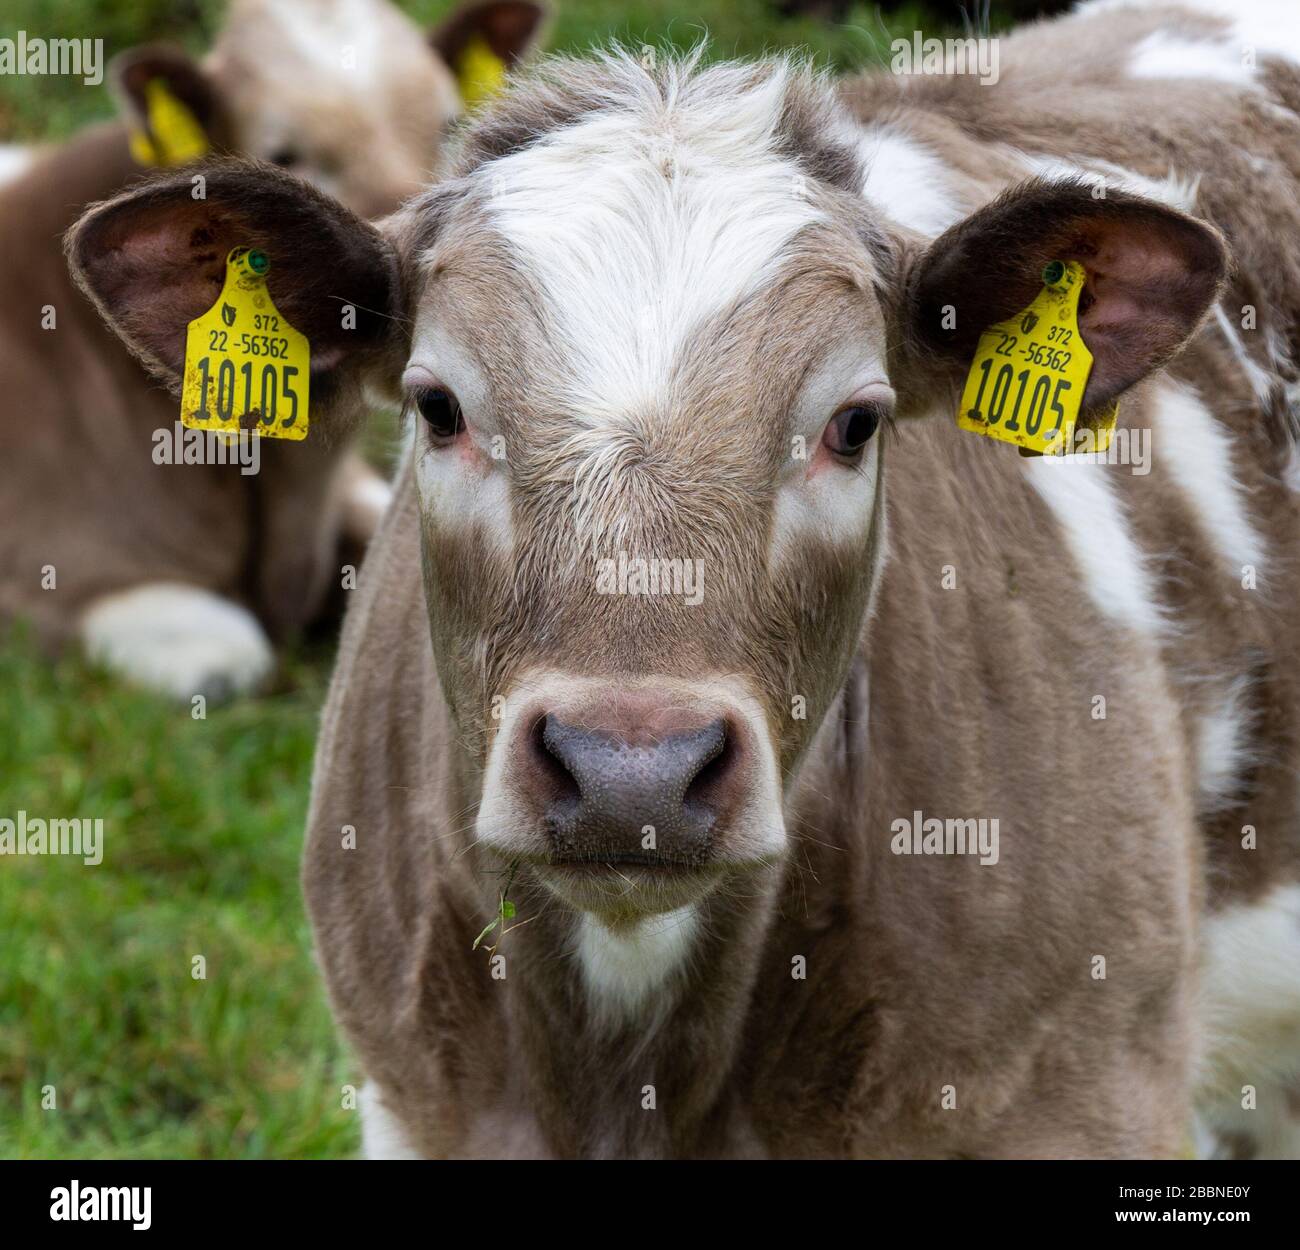 Calf head close up facing camera with two or 2 ear tags. Stock Photo